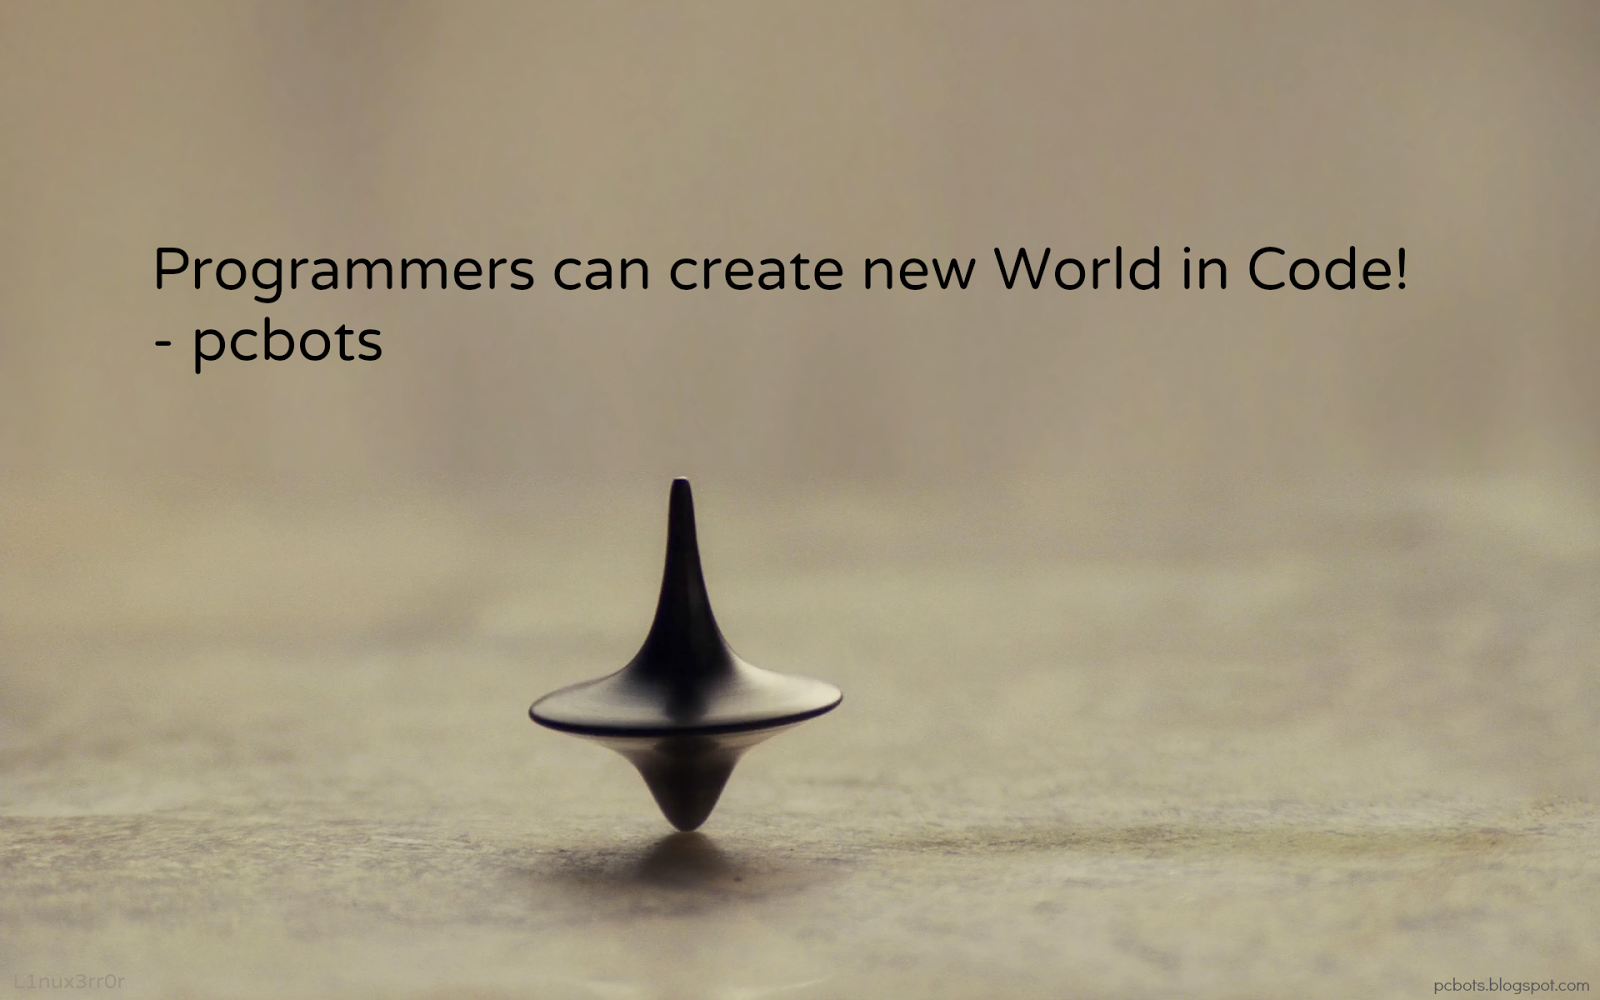 Programmers can create new world in code HD Programmers Wallpaper 1600x1000